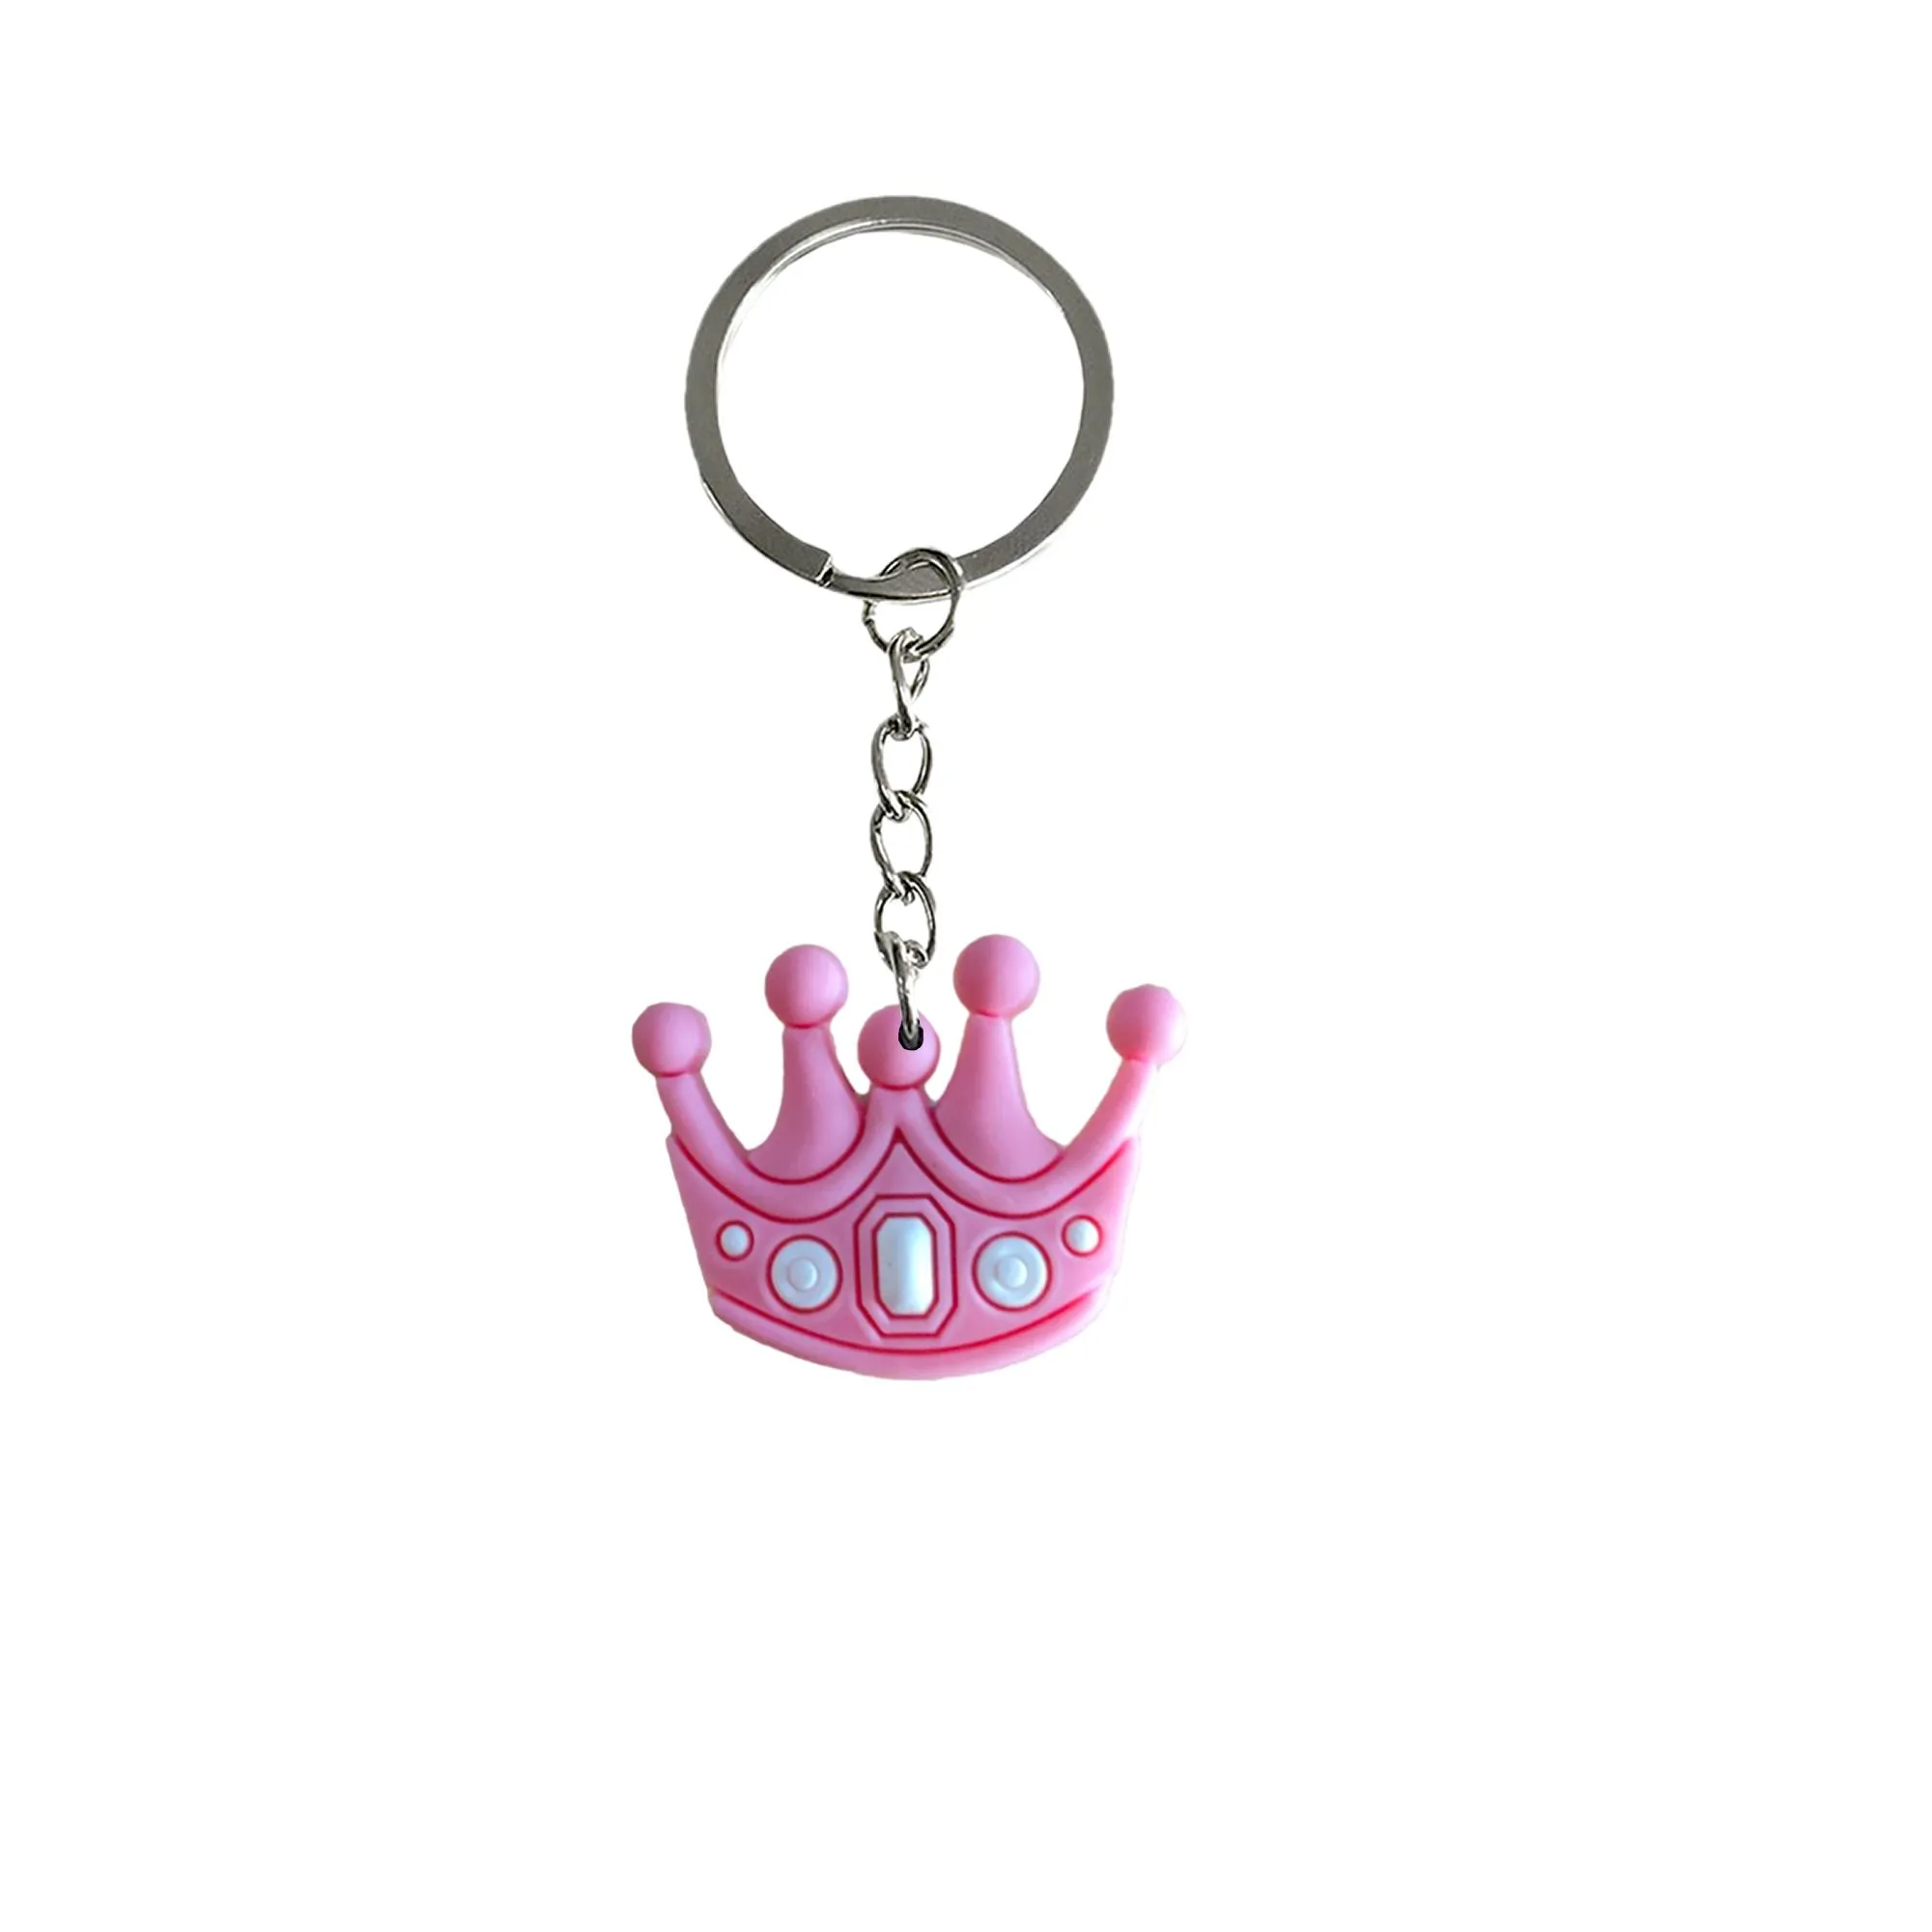 bow crown keychain couple backpack key chains for women keyring backpacks keychains boys suitable schoolbag pendant accessories bags school shoulder bag charm